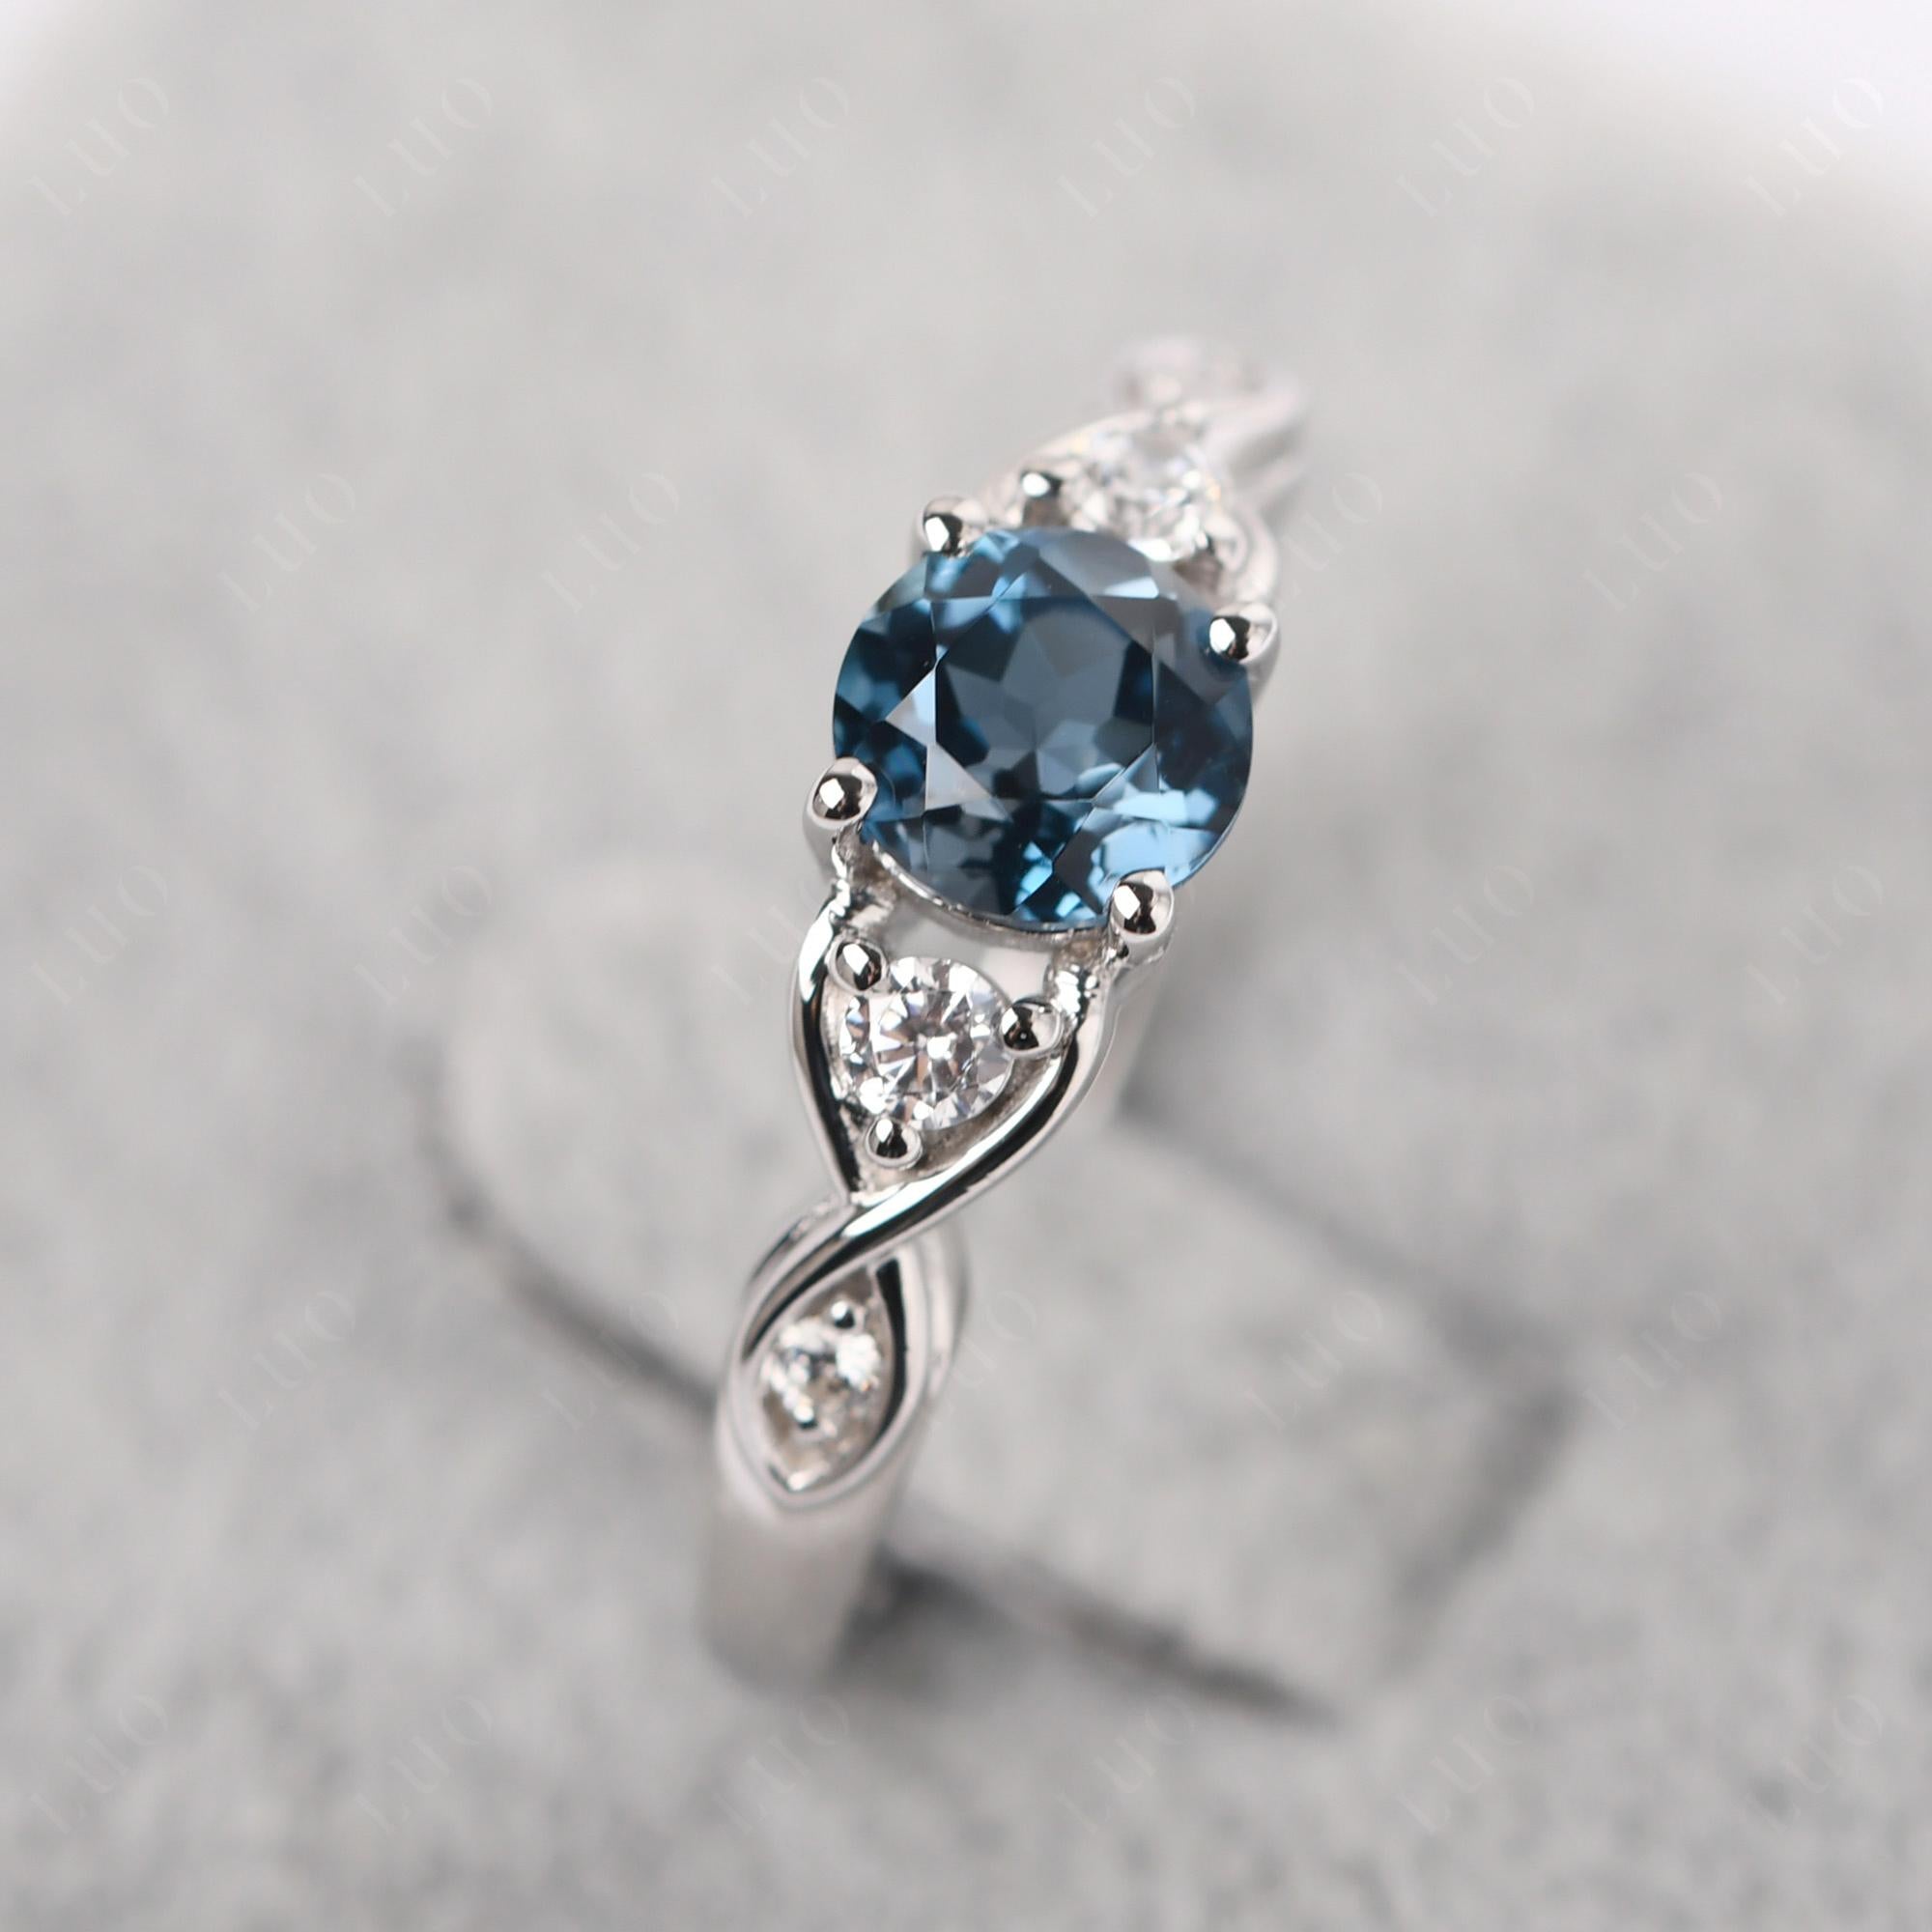 Round London Blue Topaz Ring Wedding Ring - LUO Jewelry